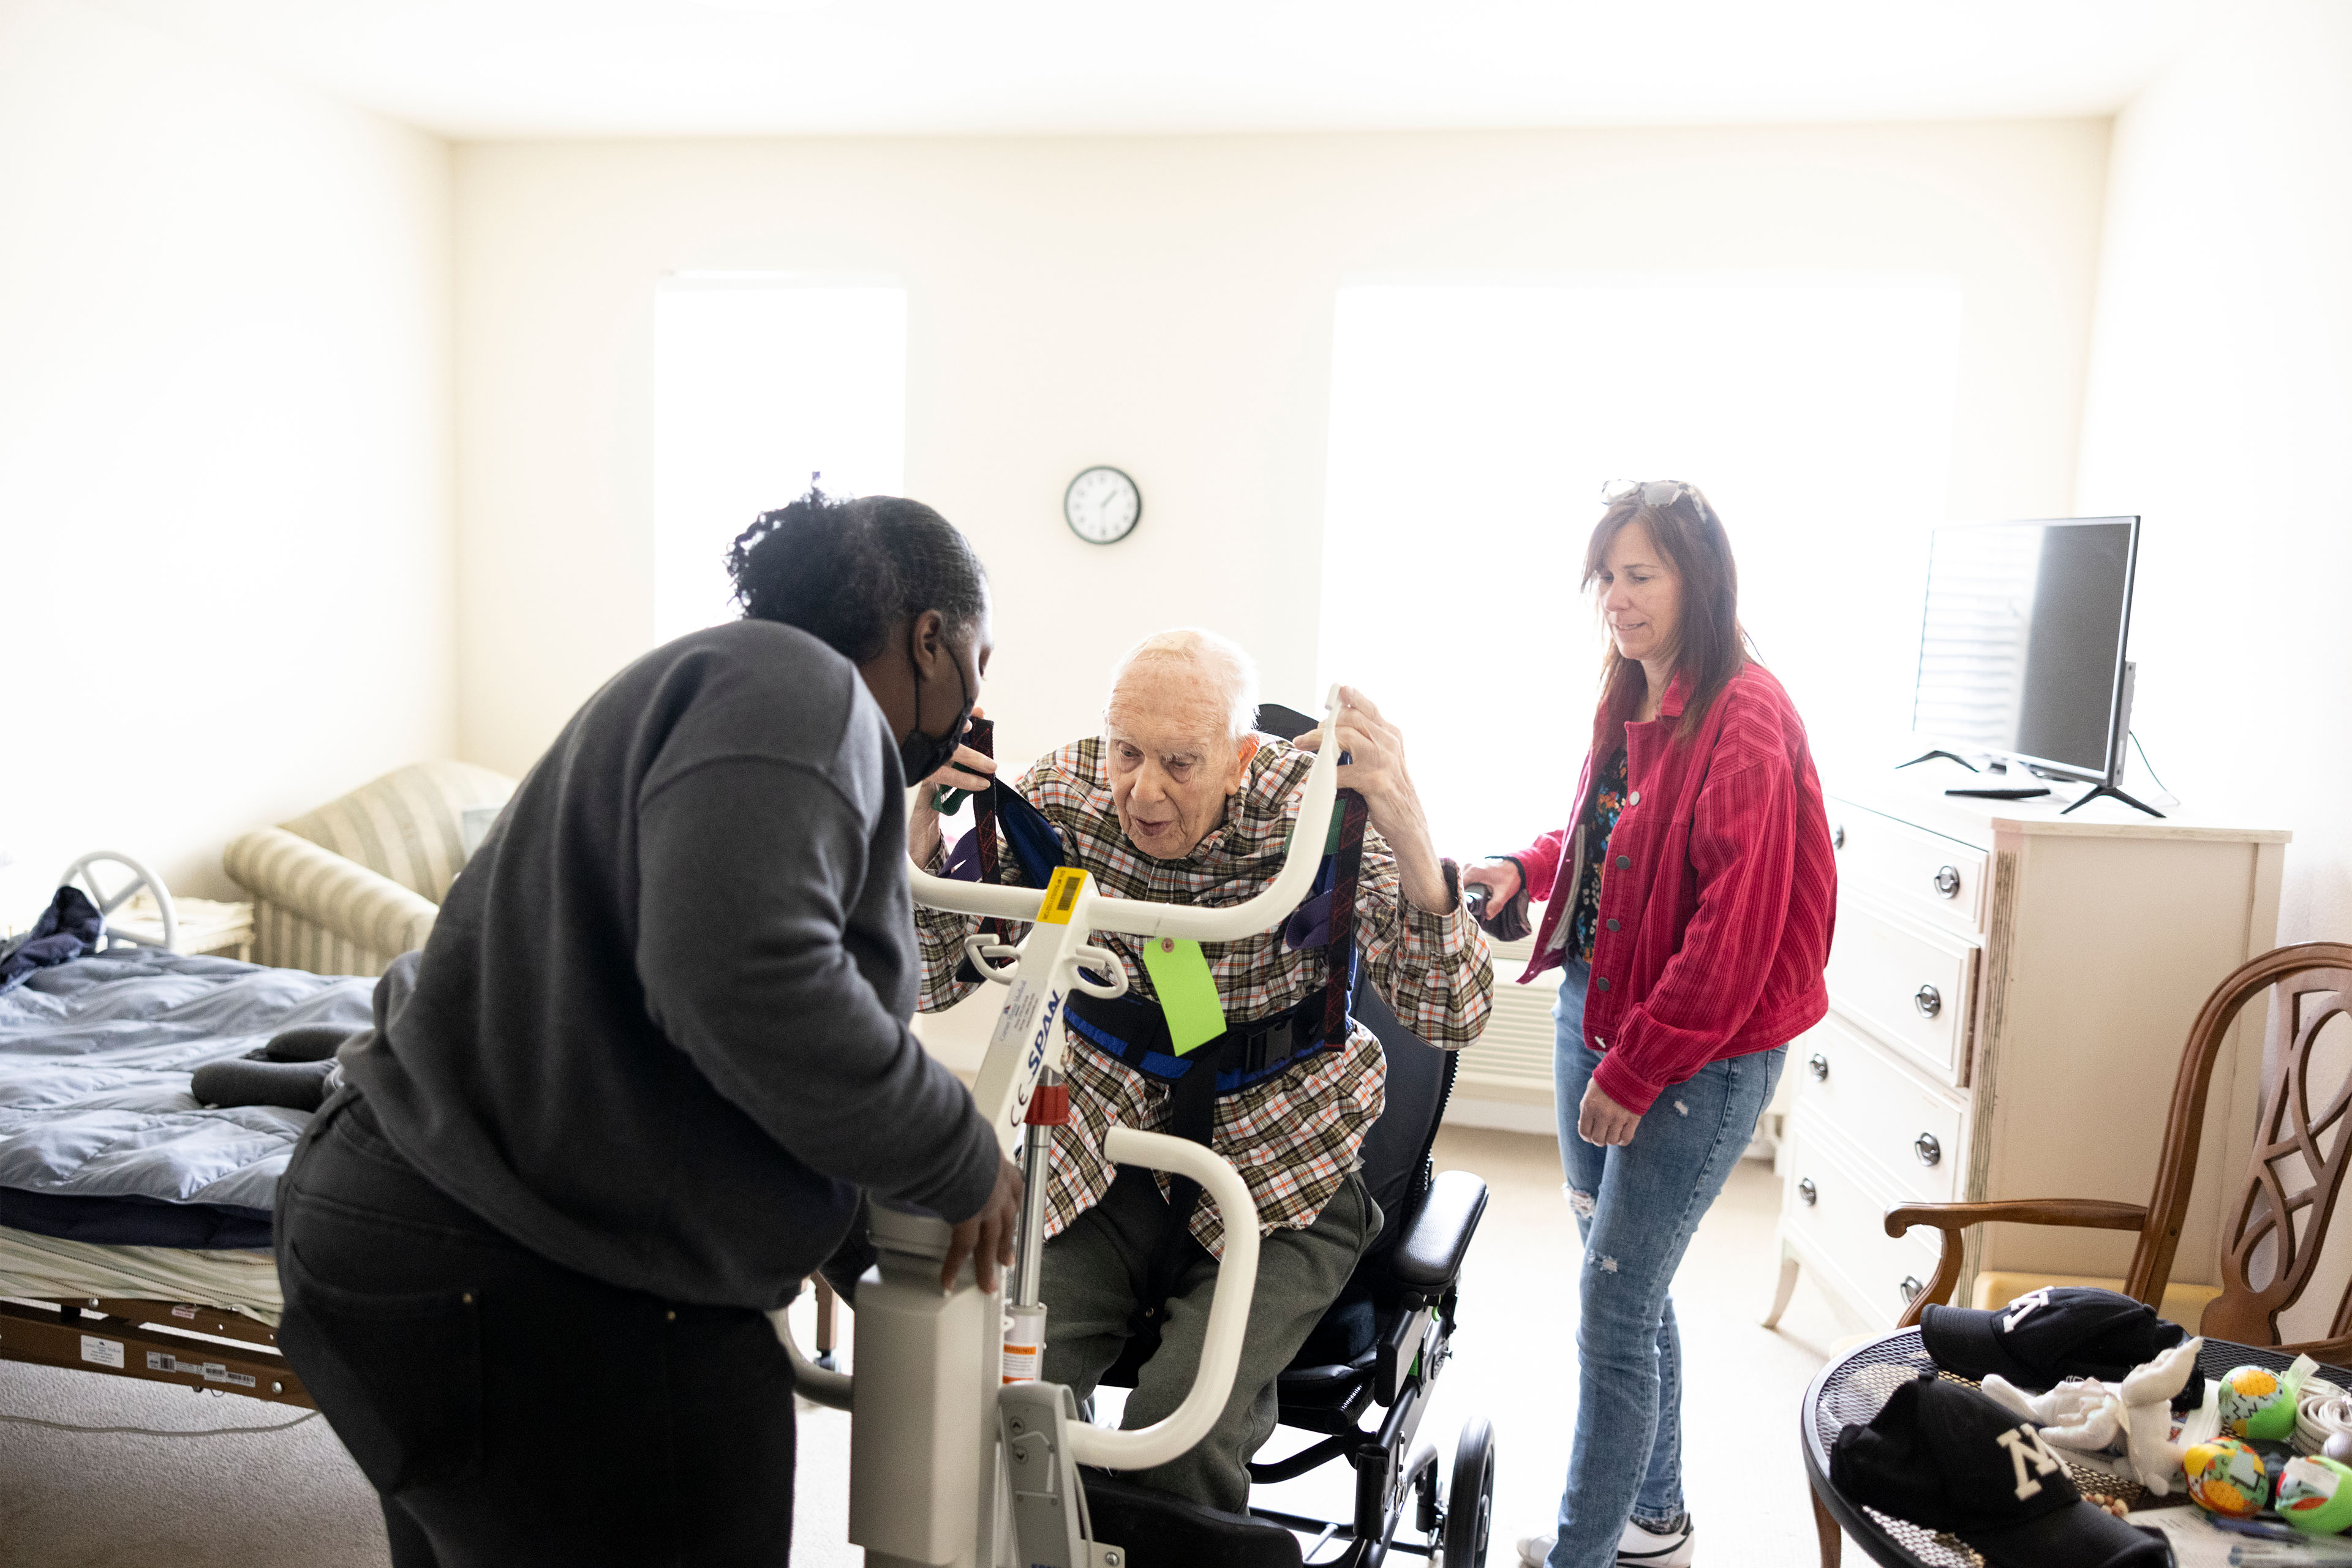 A photo of an elderly man being helped into a wheelchair by a nursing aid. A woman is watching from behind the man.